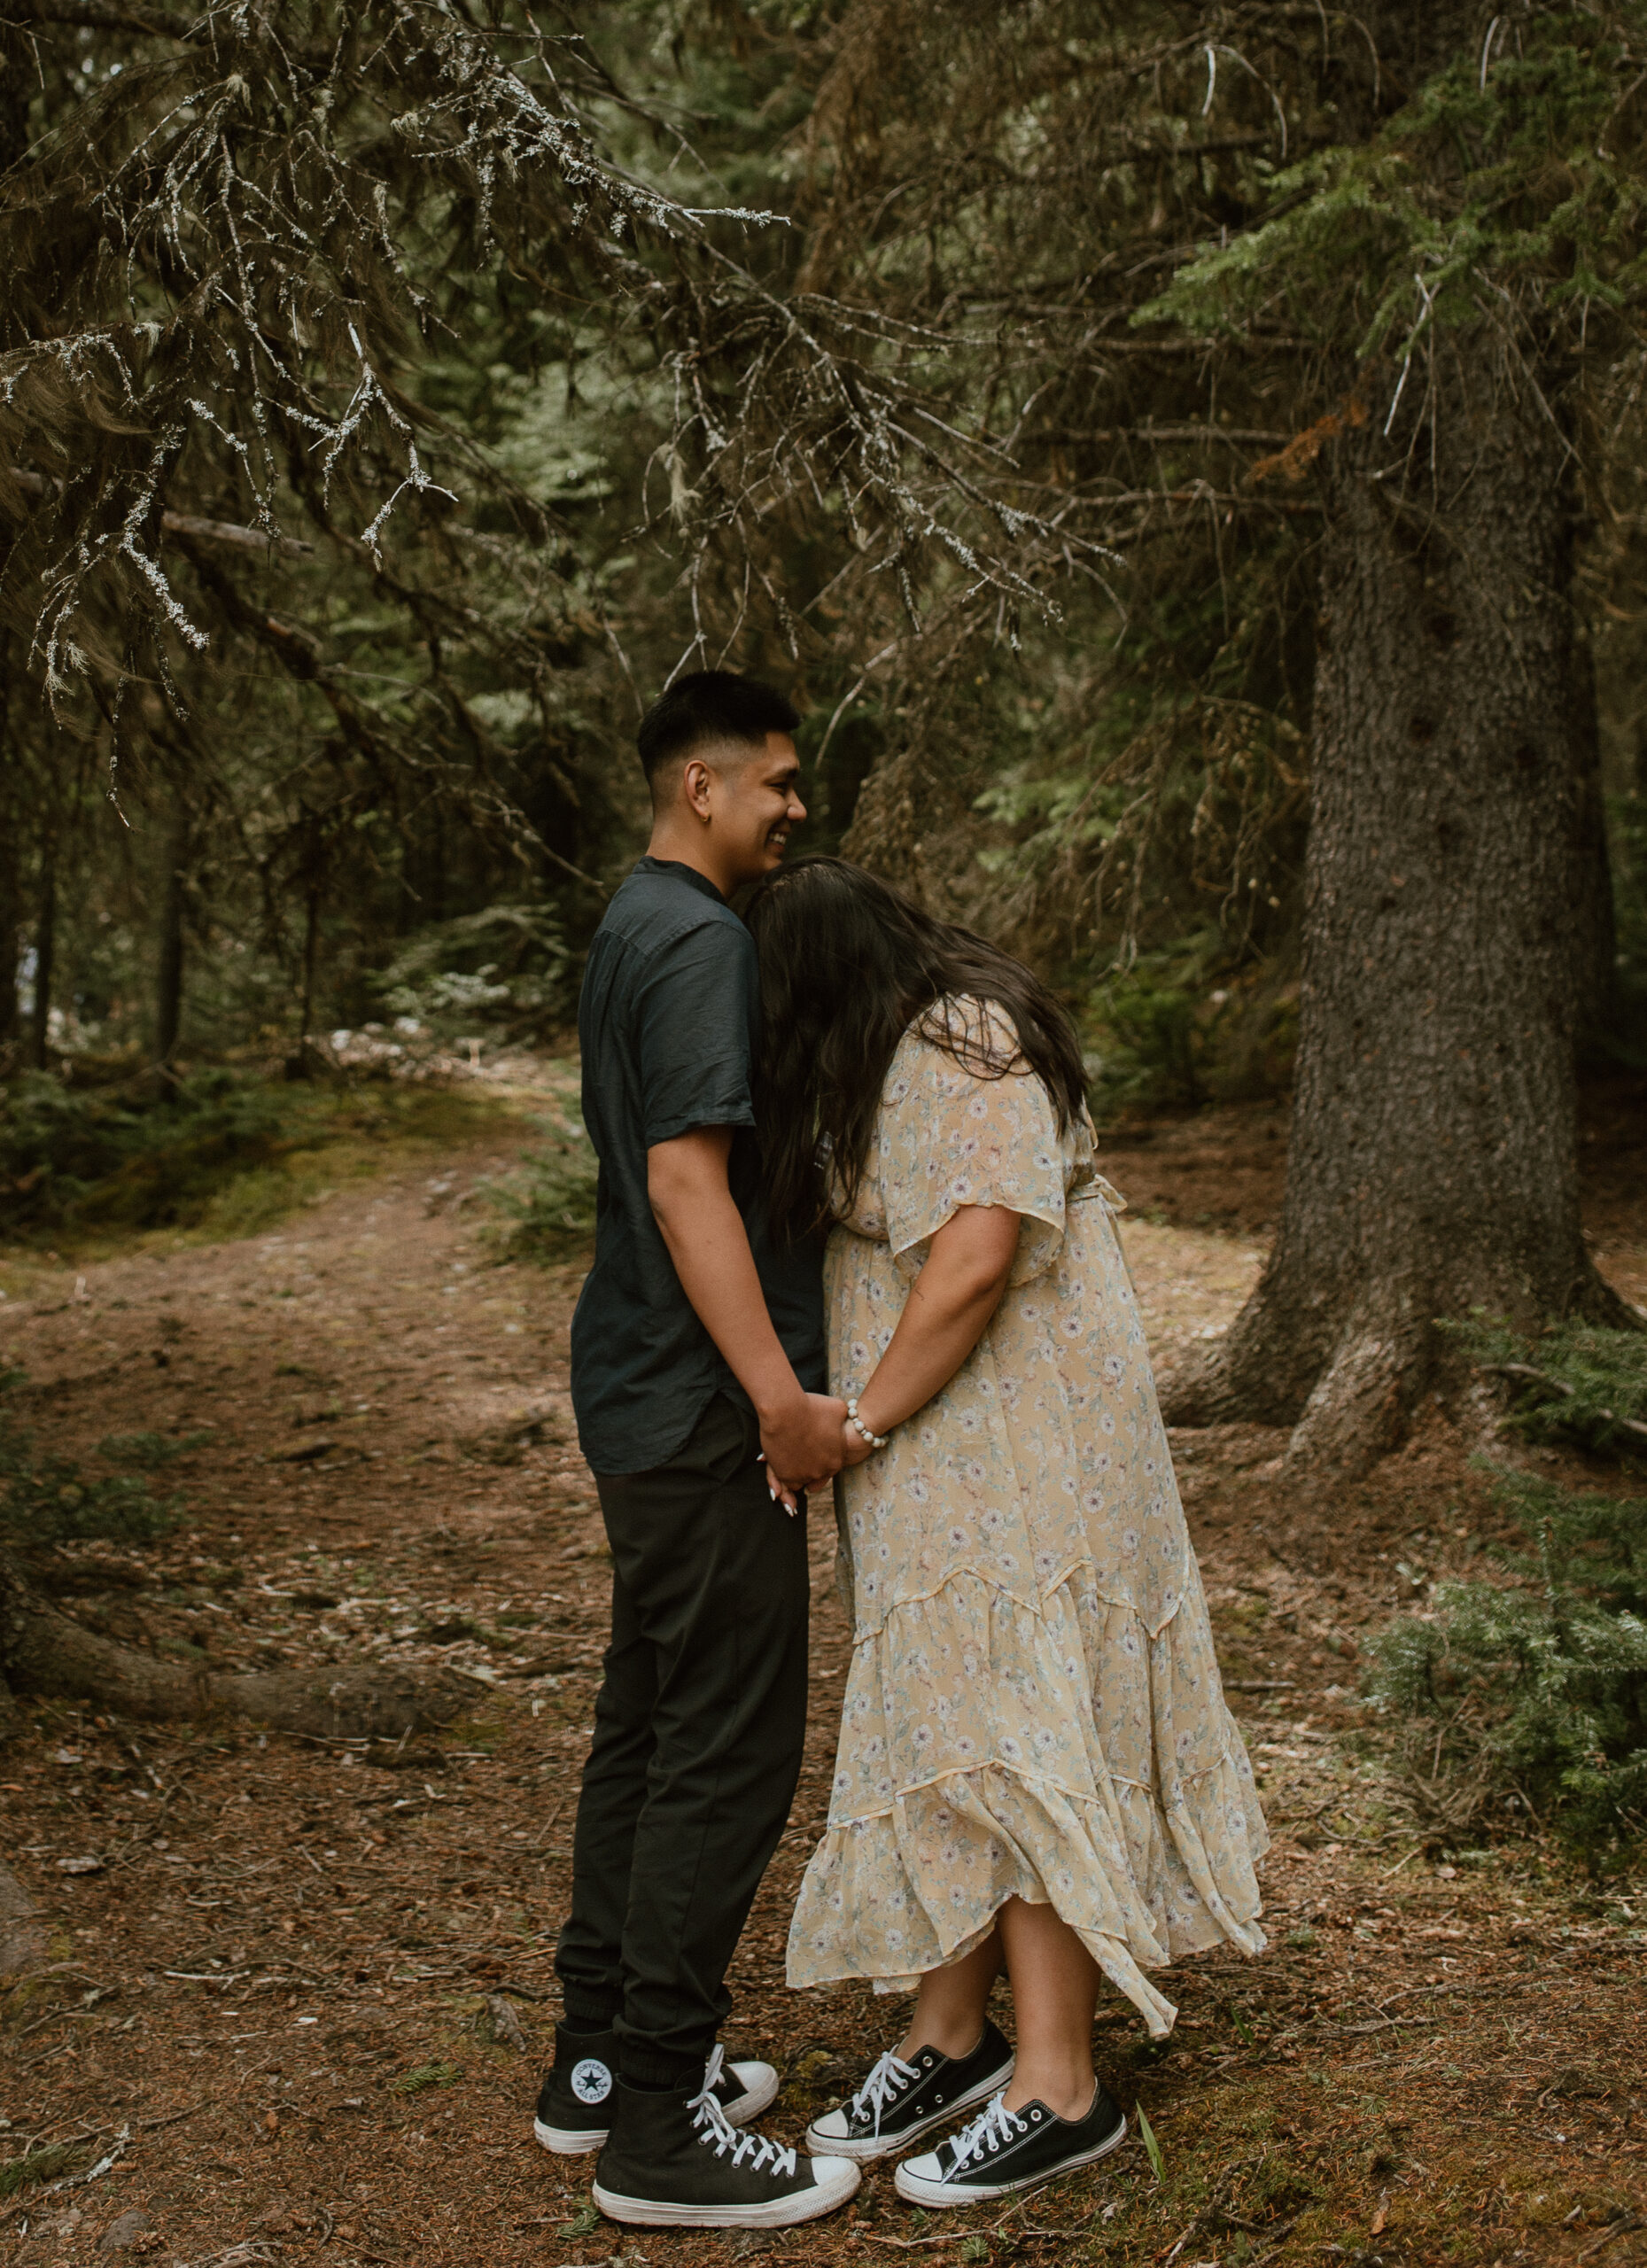 couple laughing in forest during an engagement session in Banff, Alberta